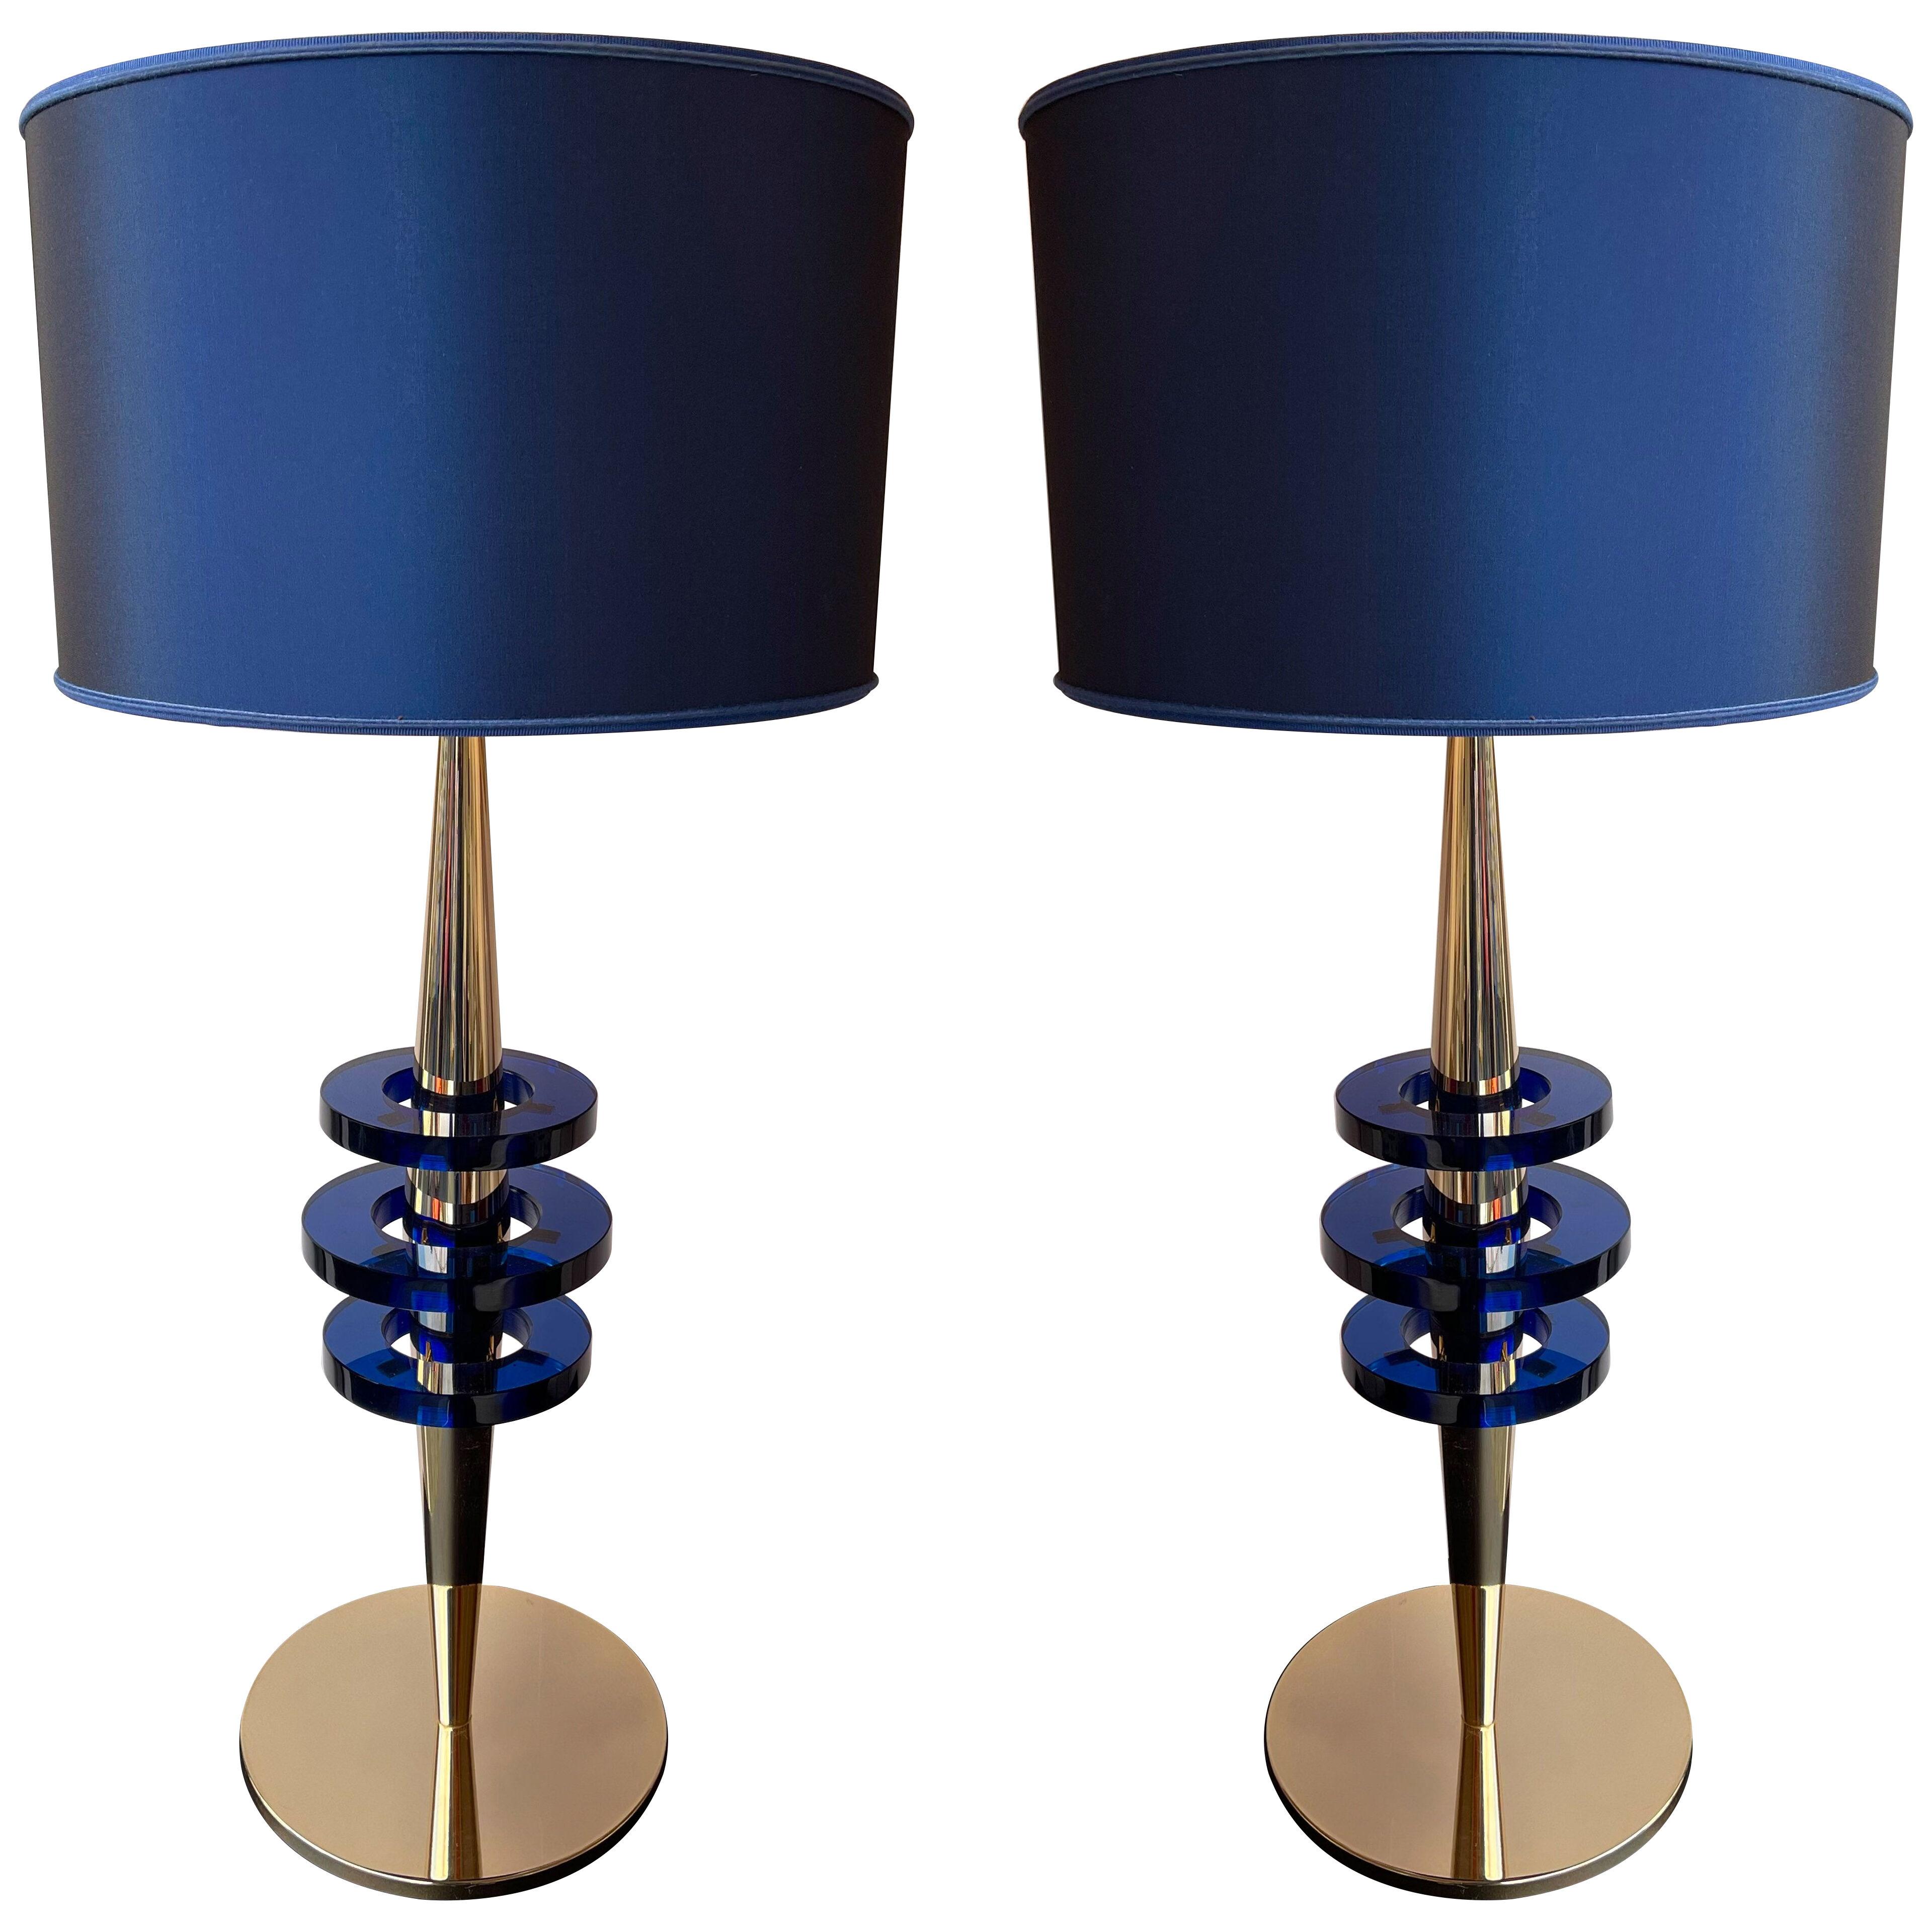 Contemporary Pair of Brass and Blue Murano Glass Disc Lamps, Italy